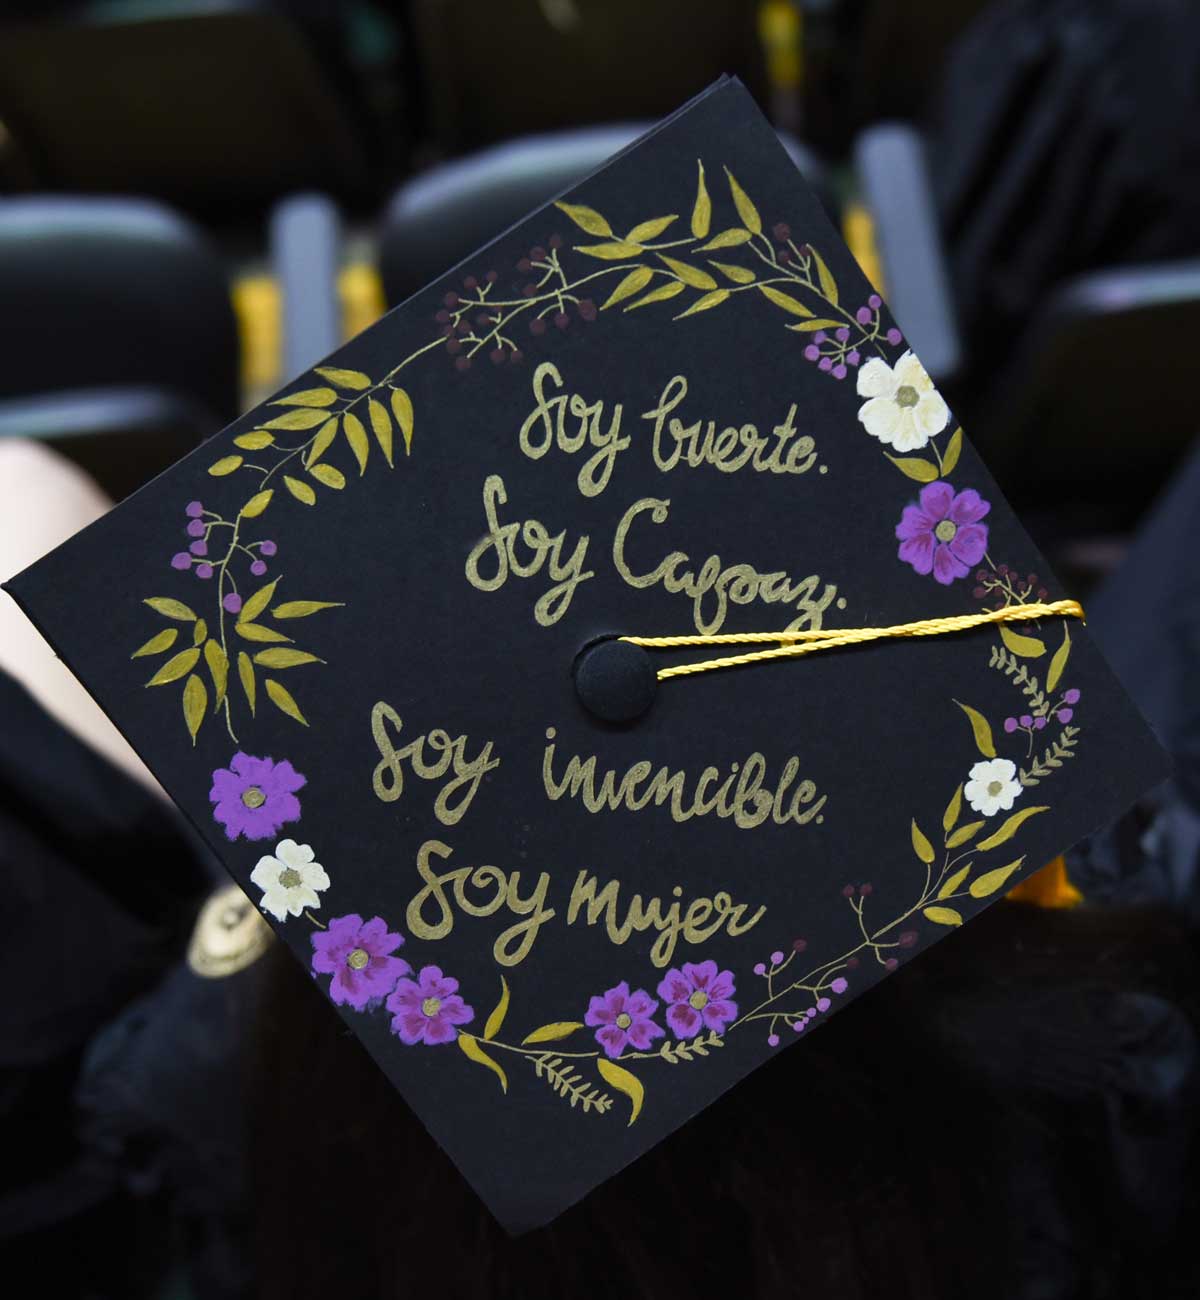 Grad cap decorated with Spanish text